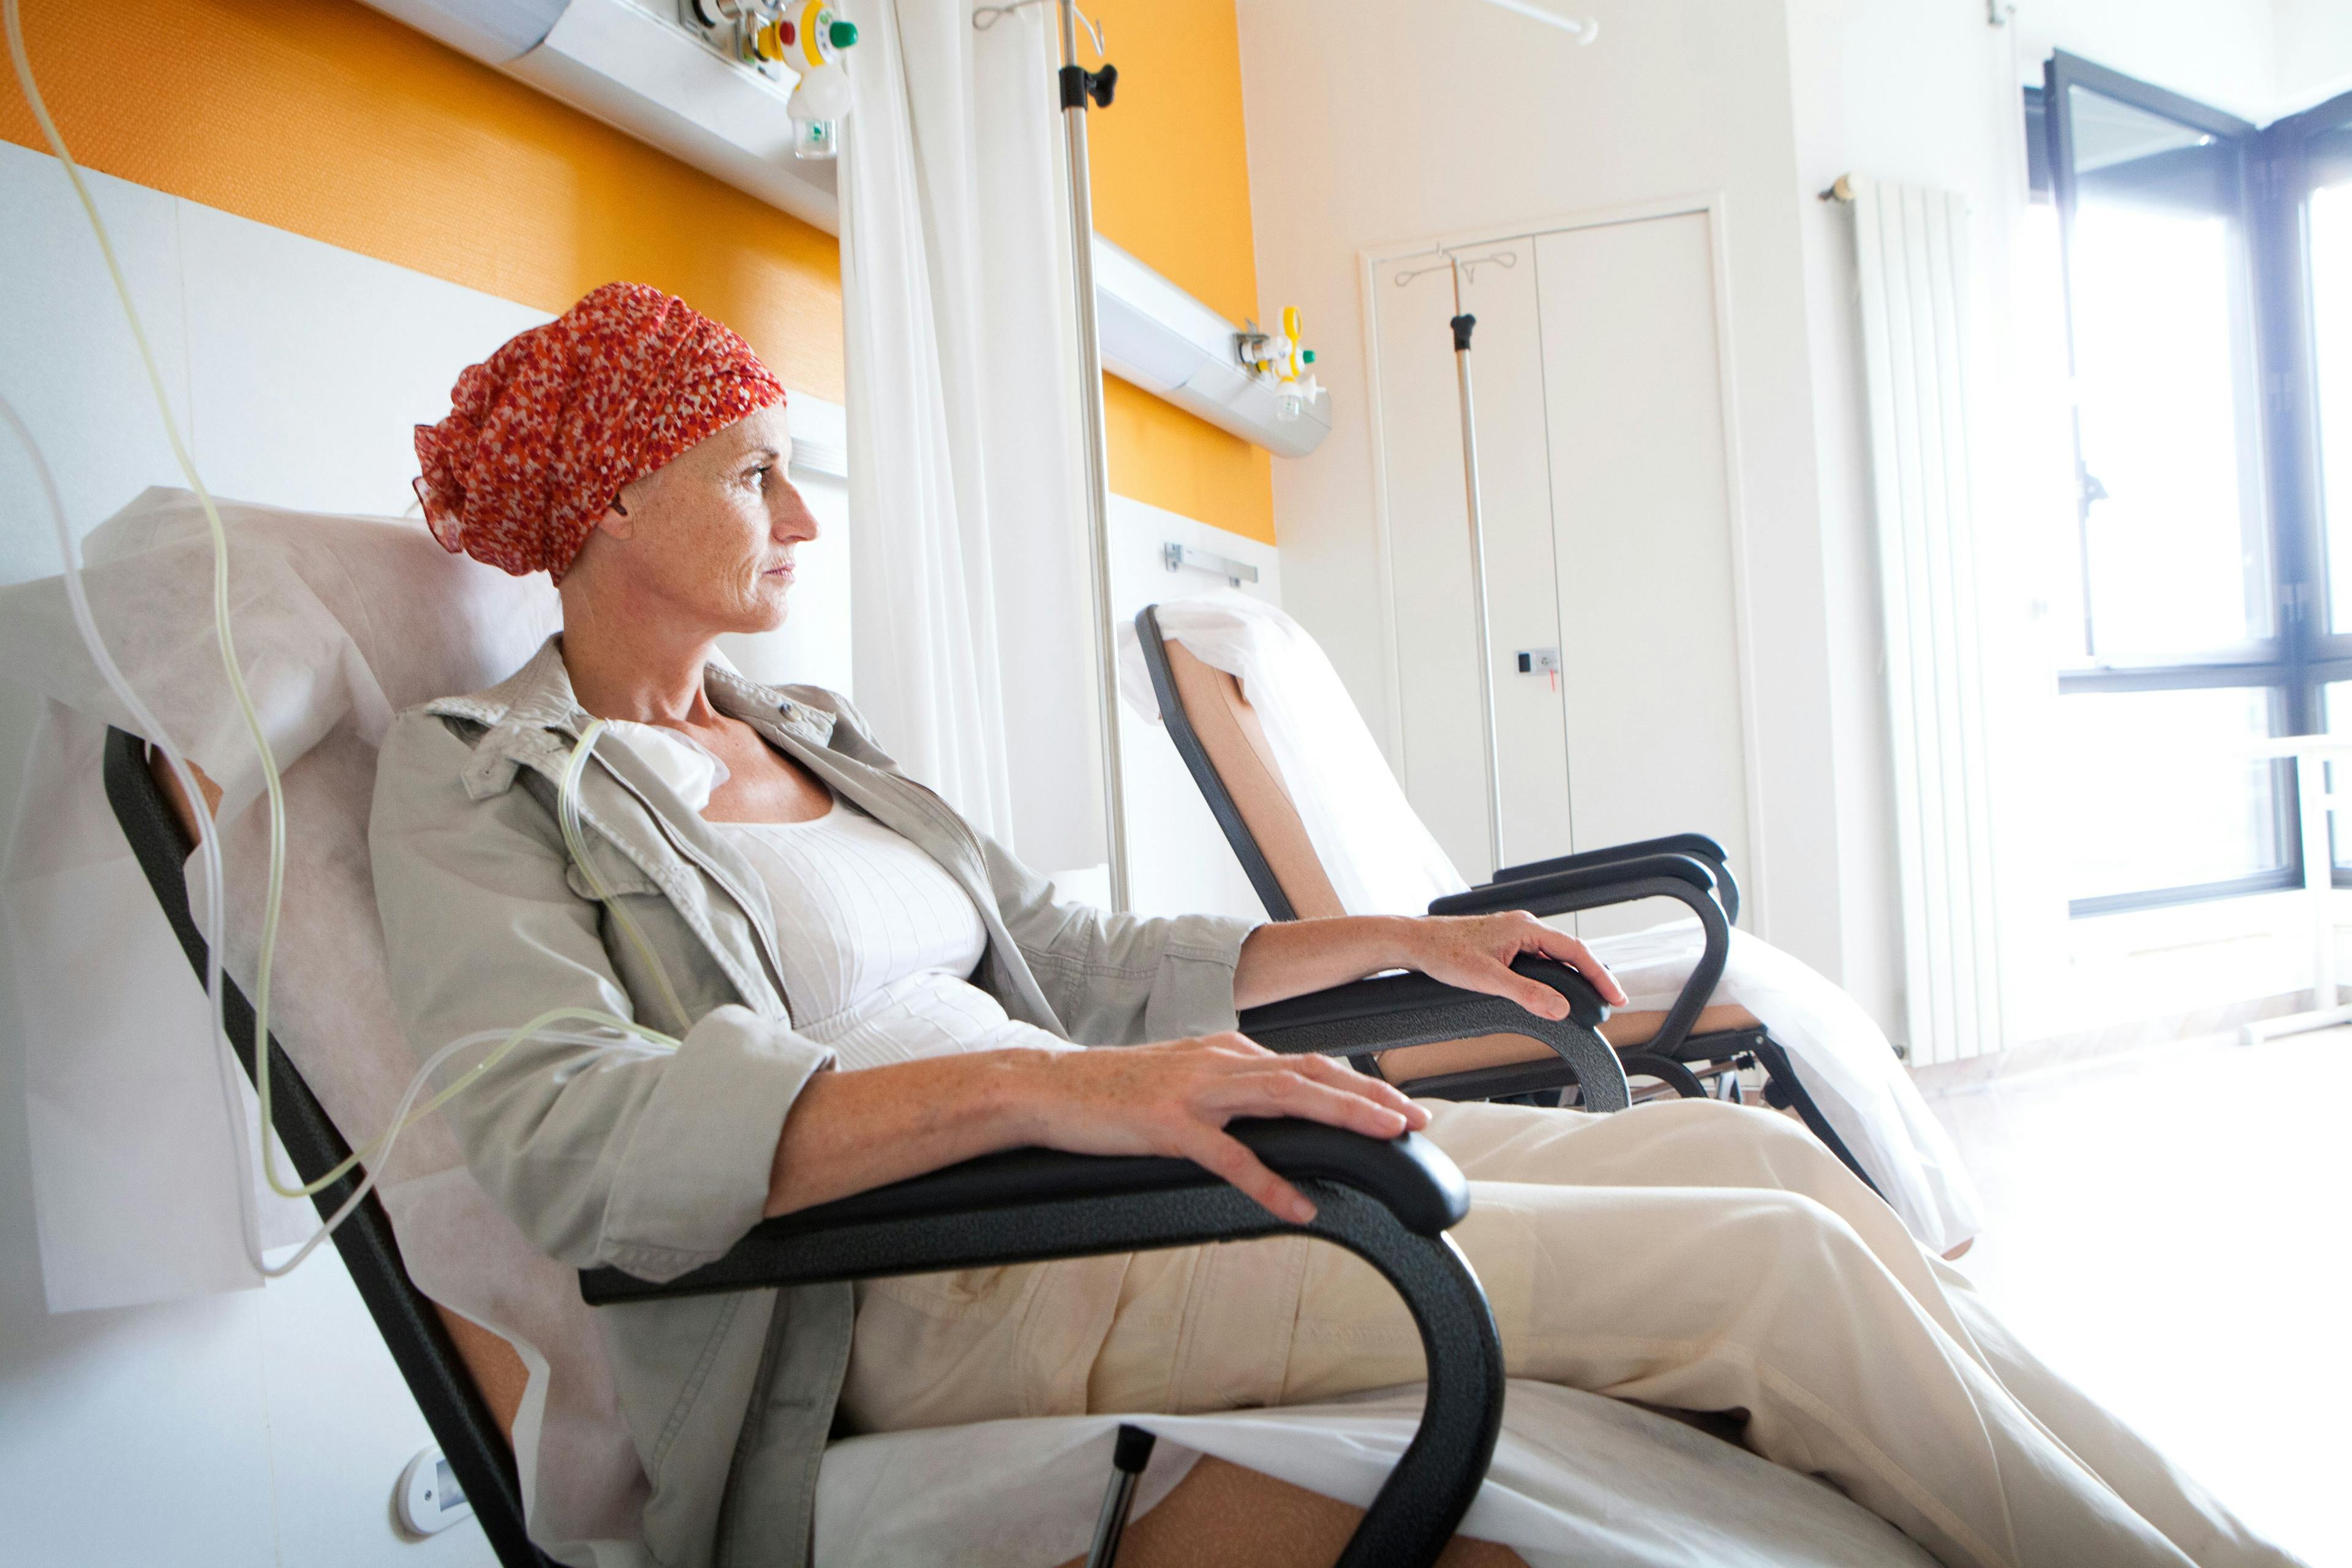 Female patient with cancer receiving chemotherapy treatment